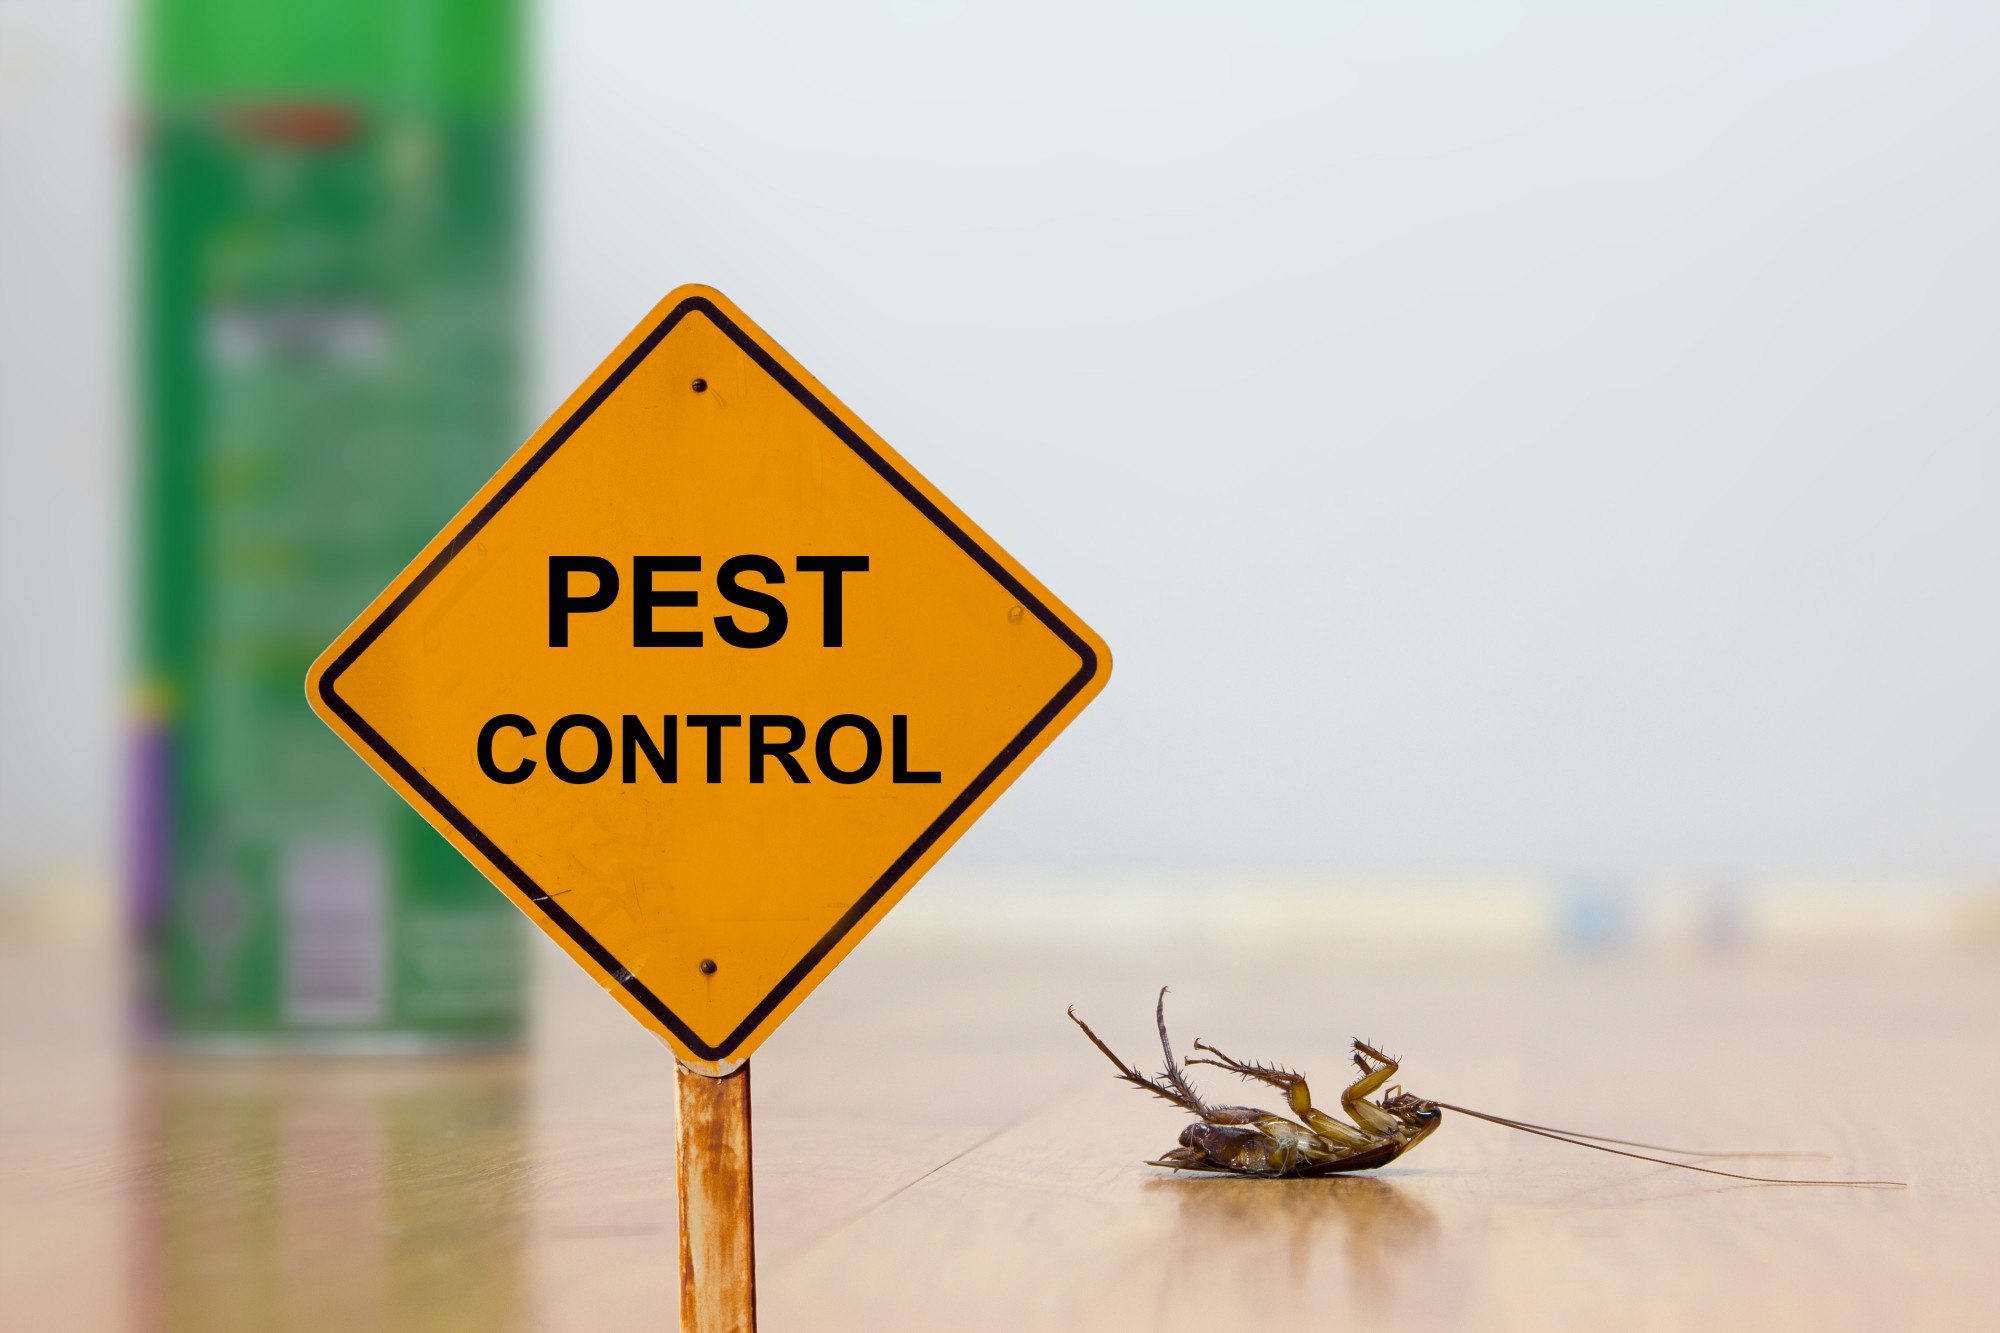 10 Effective Tips to Keep Bugs out of Your House for Good